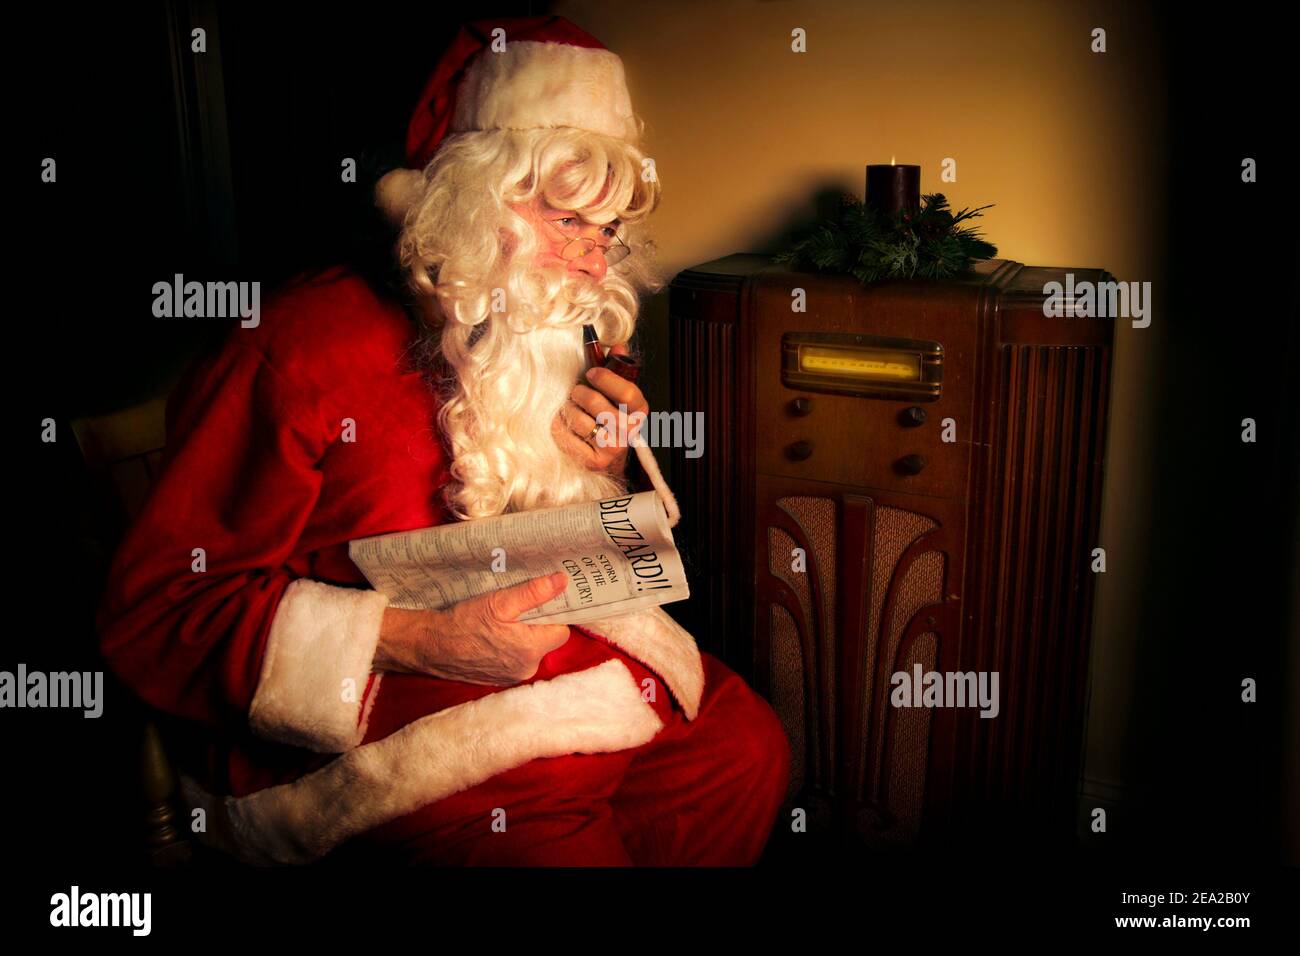 Santa Claus listens to the weather report an old fashioned radio. He’s holding a newspaper that says “Blizzard!” on it. Stock Photo